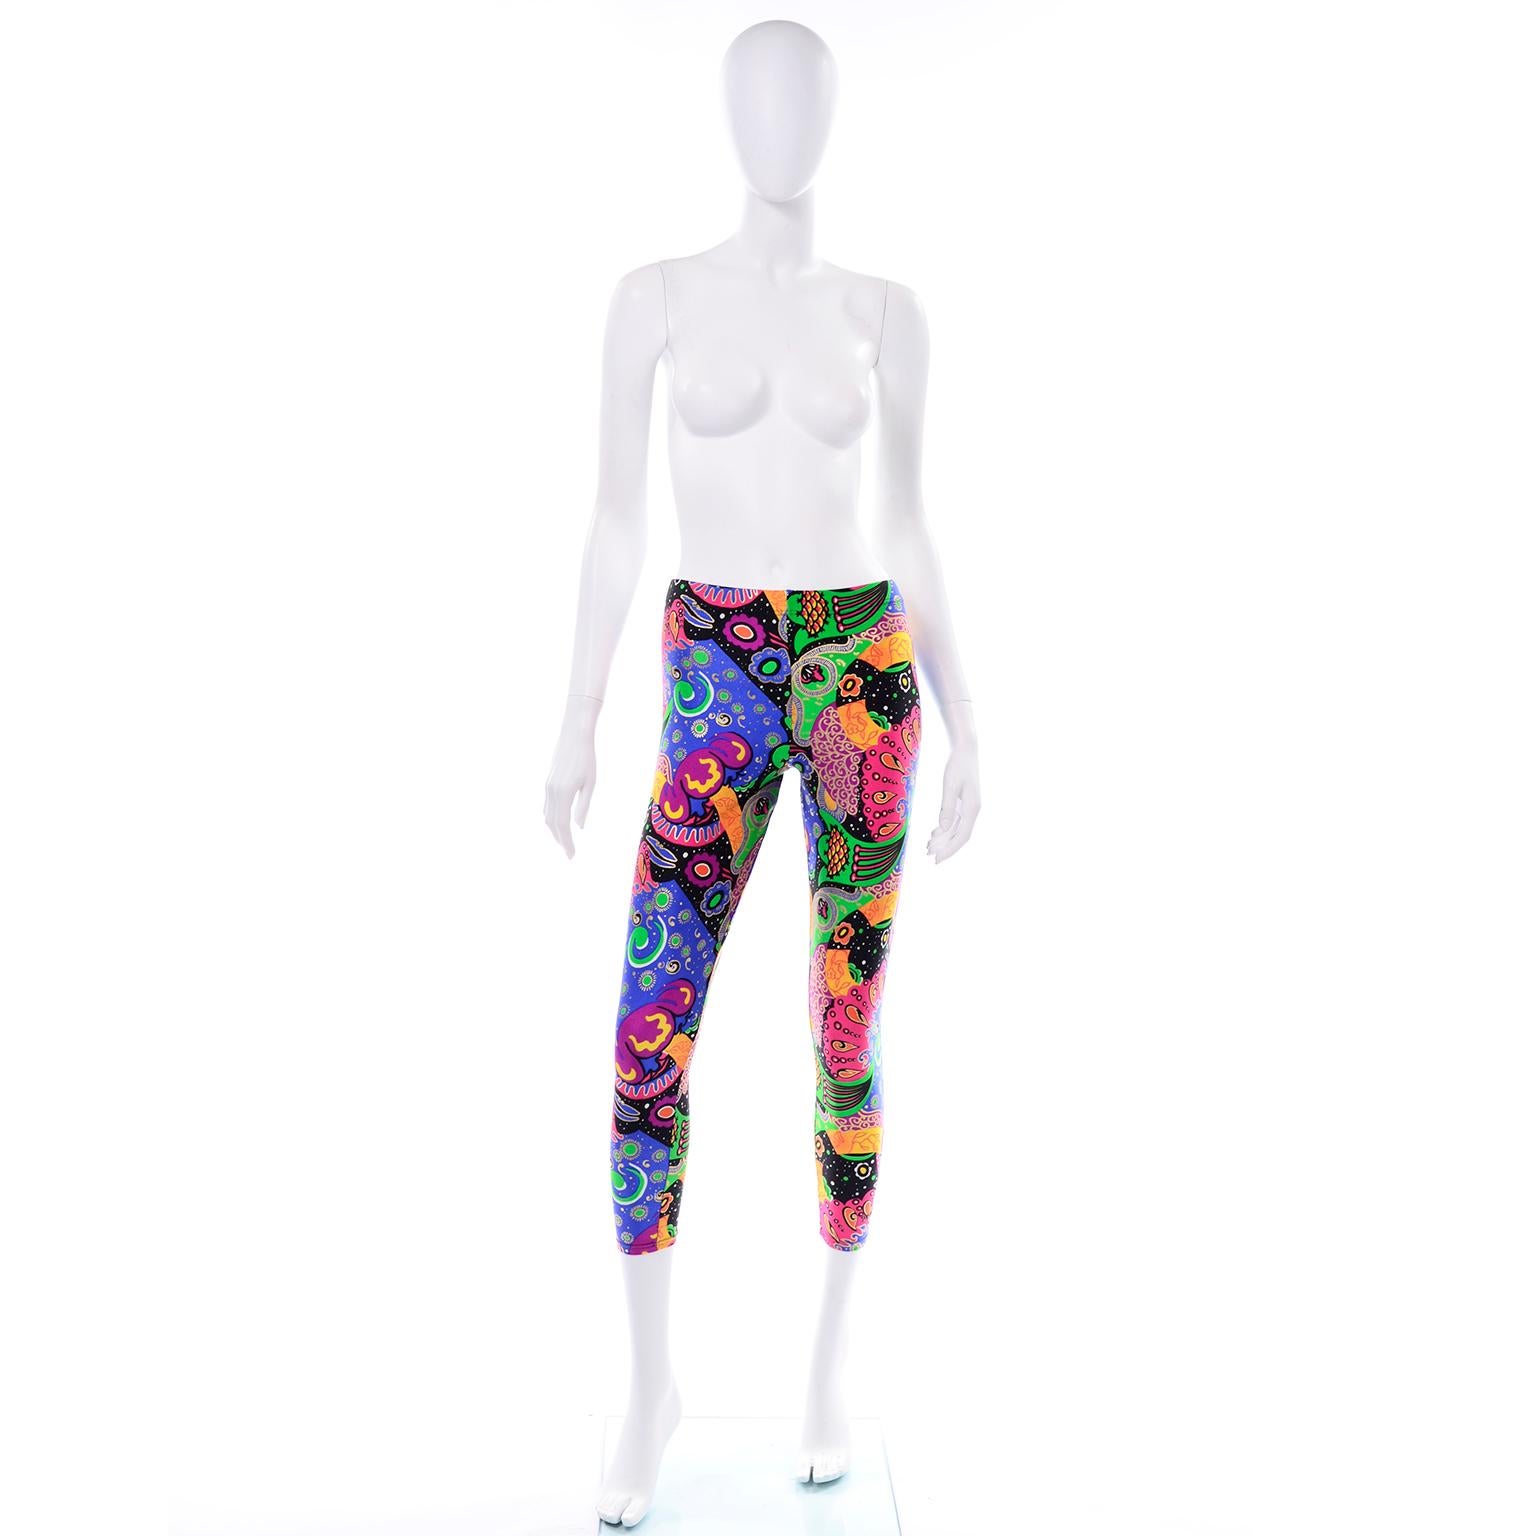 These late 1980's Emanuel Ungaro deadstock vintage leggings are so unique and fun! These bold, bright abstract graphic print leggings include shades of black, white, green, gold, magenta, orange, yellow, purple, blue, and red in the design. Ungaro